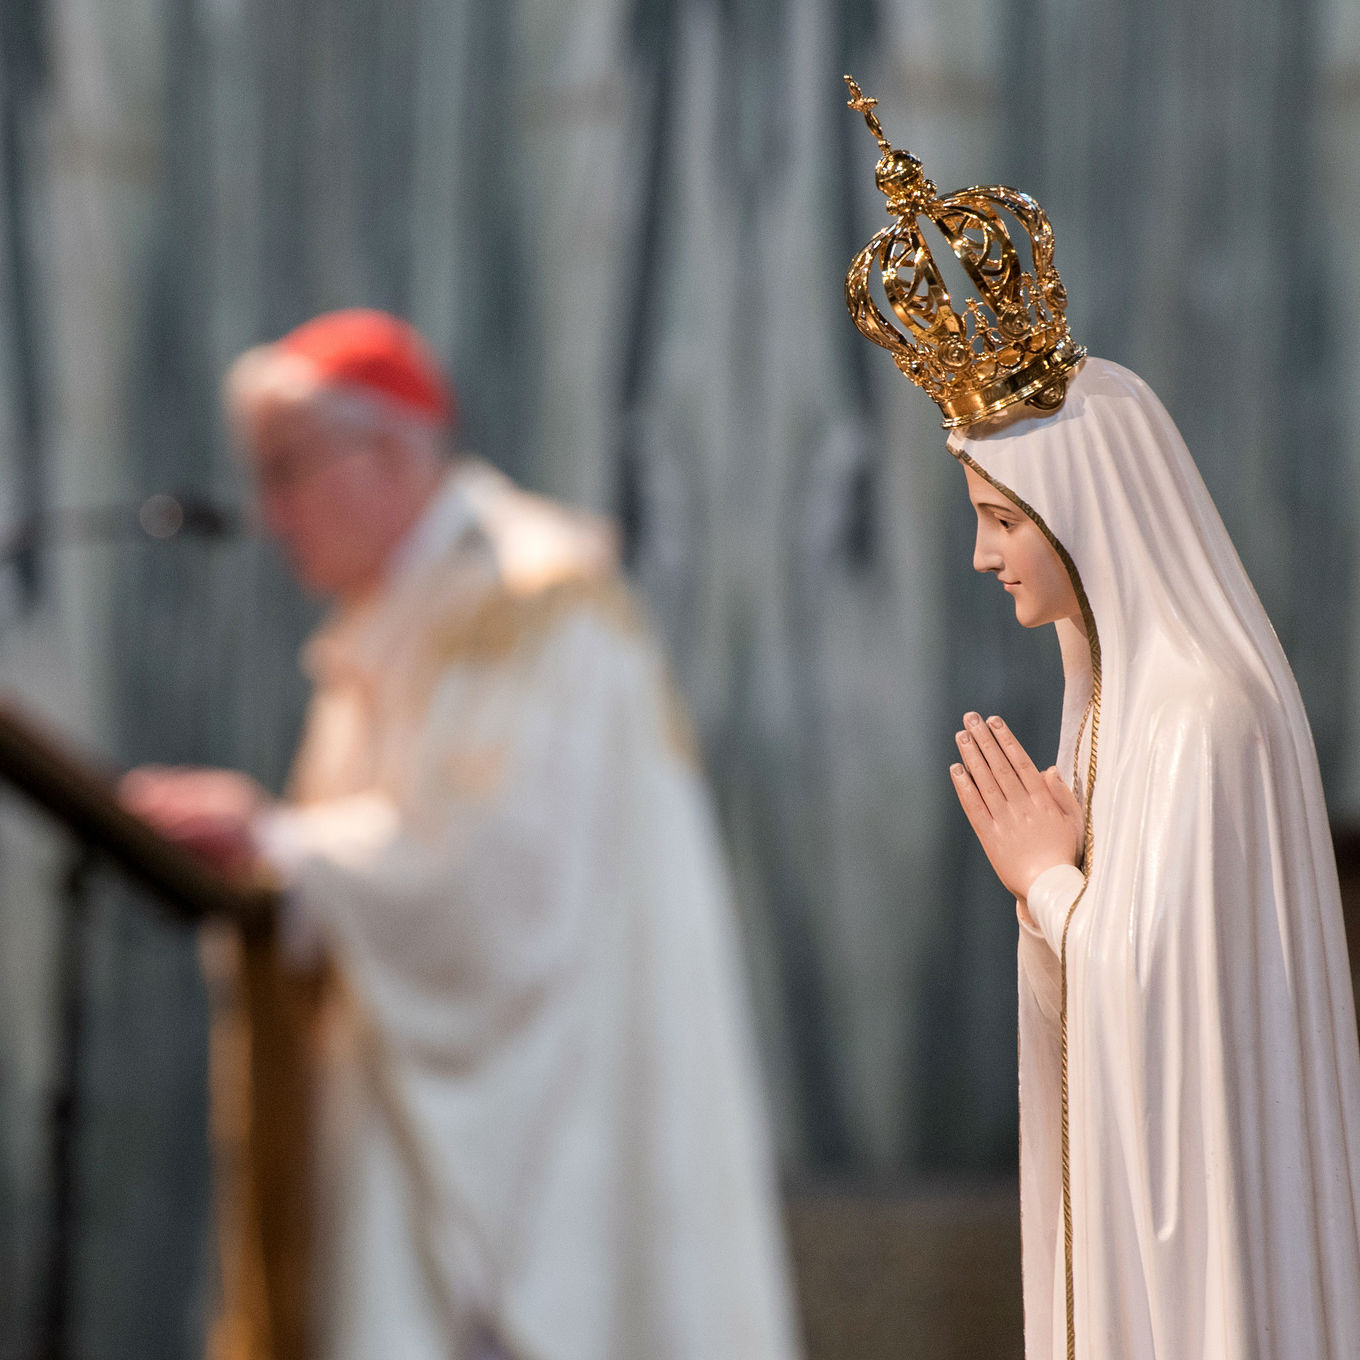 Cardinal Nichols consecrates England and Wales to Immaculate Heart of Mary 